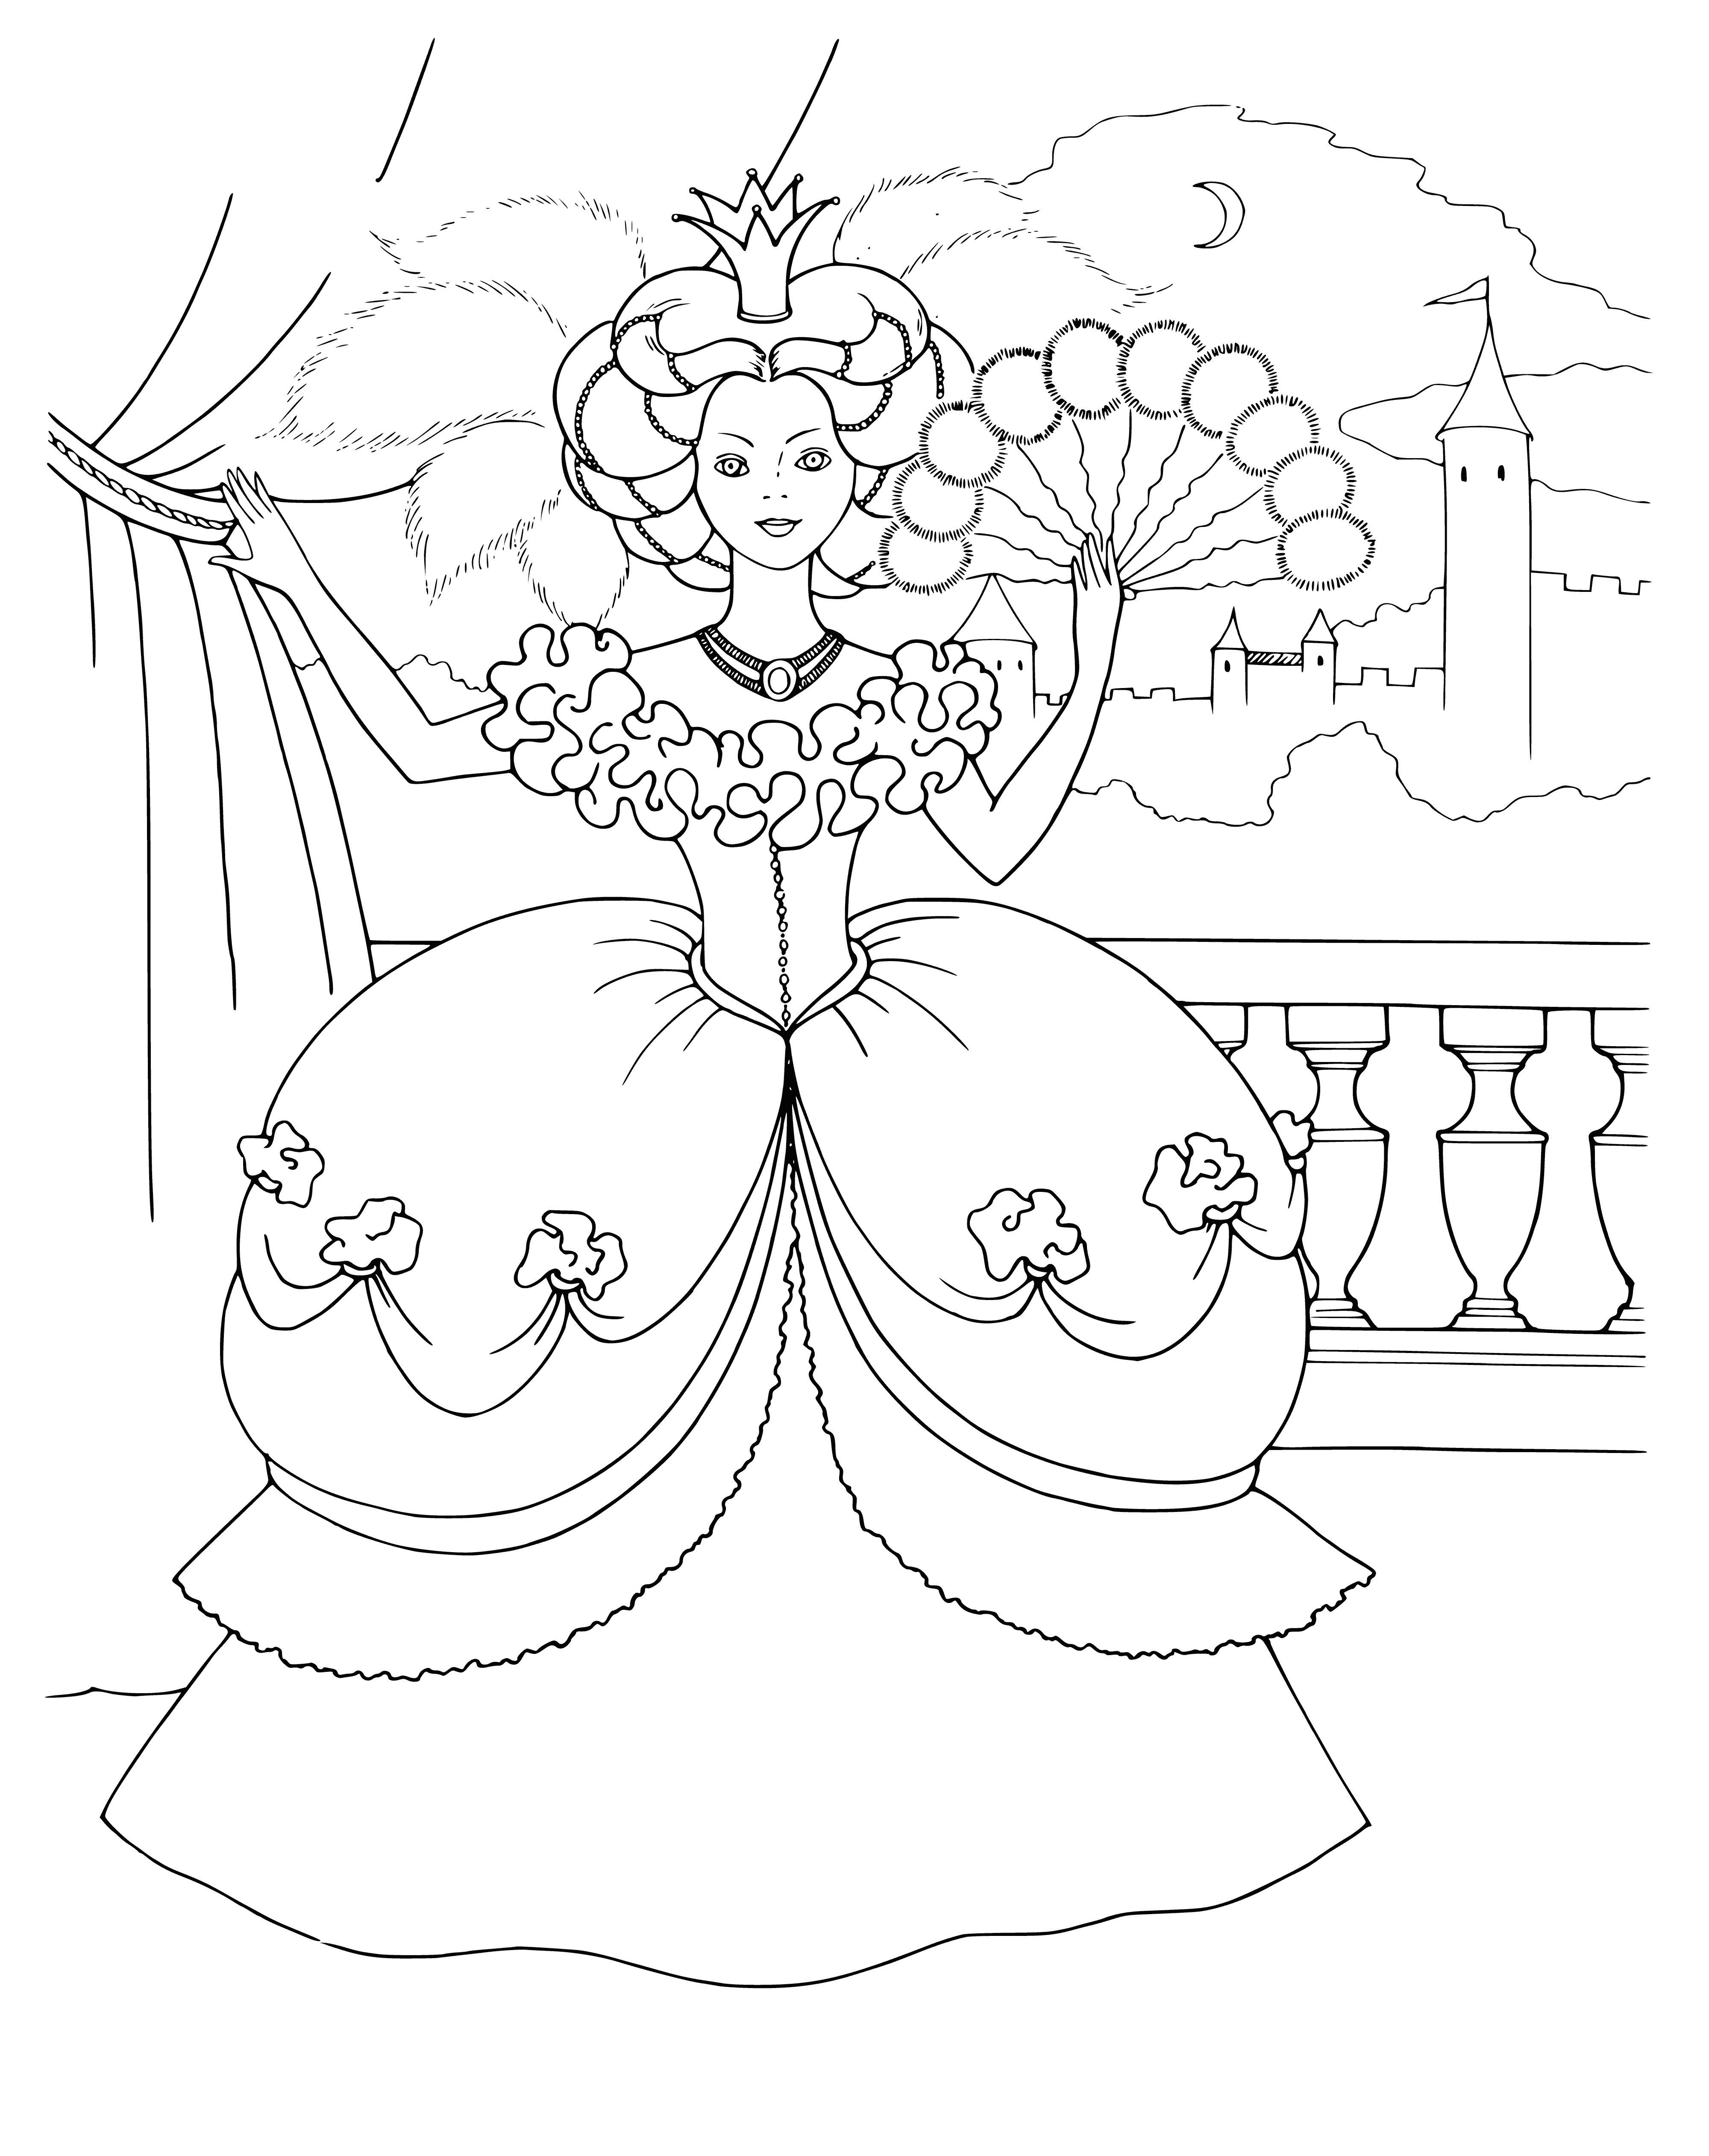 Princess on the balcony coloring page